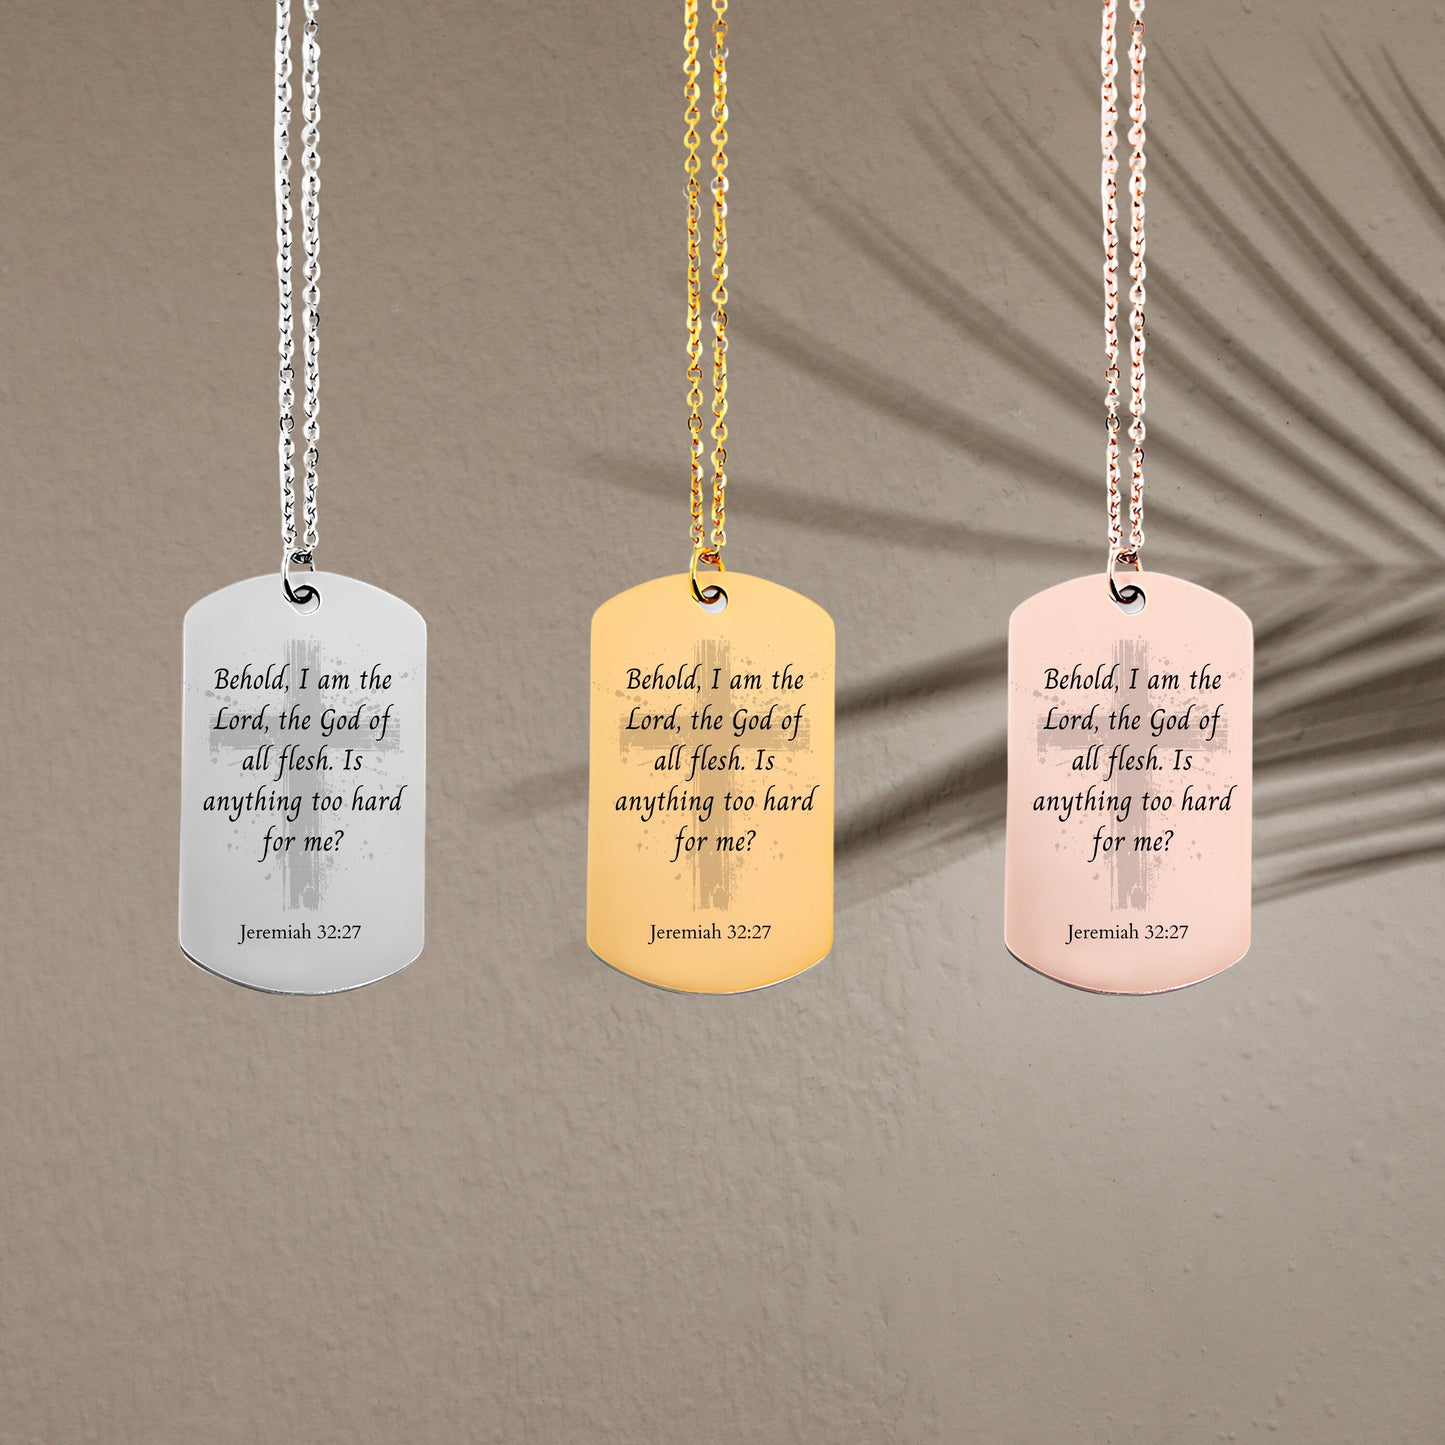 Jeremiah 32 27quote necklace, gold bible verse, 14k gold cross charm necklace, confirmation gift, gold bar tag necklace,religious scripture